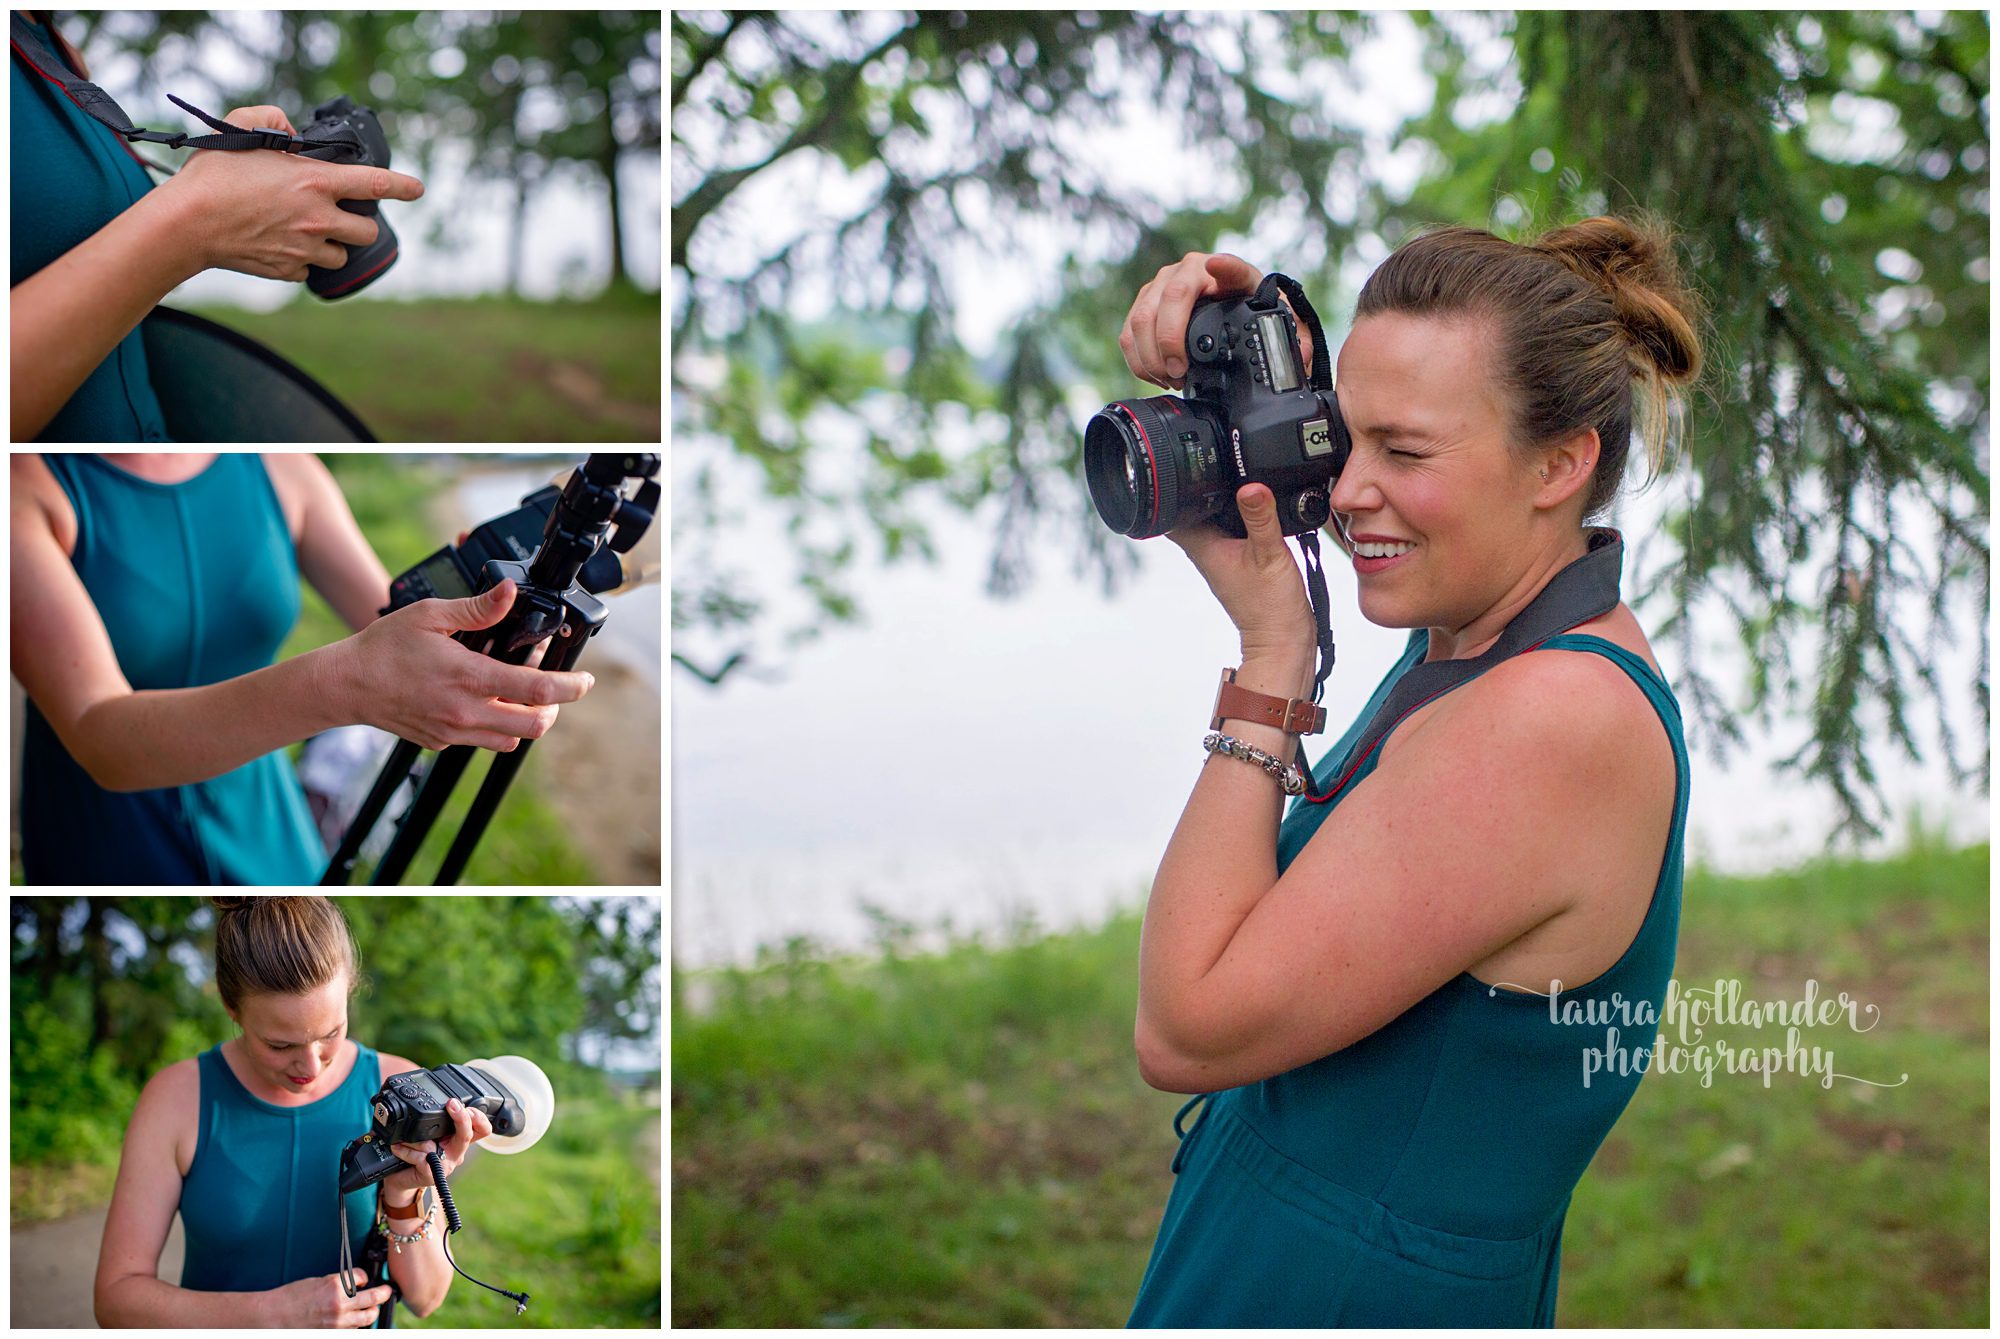 behind the scenes with Laura Hollander Photography